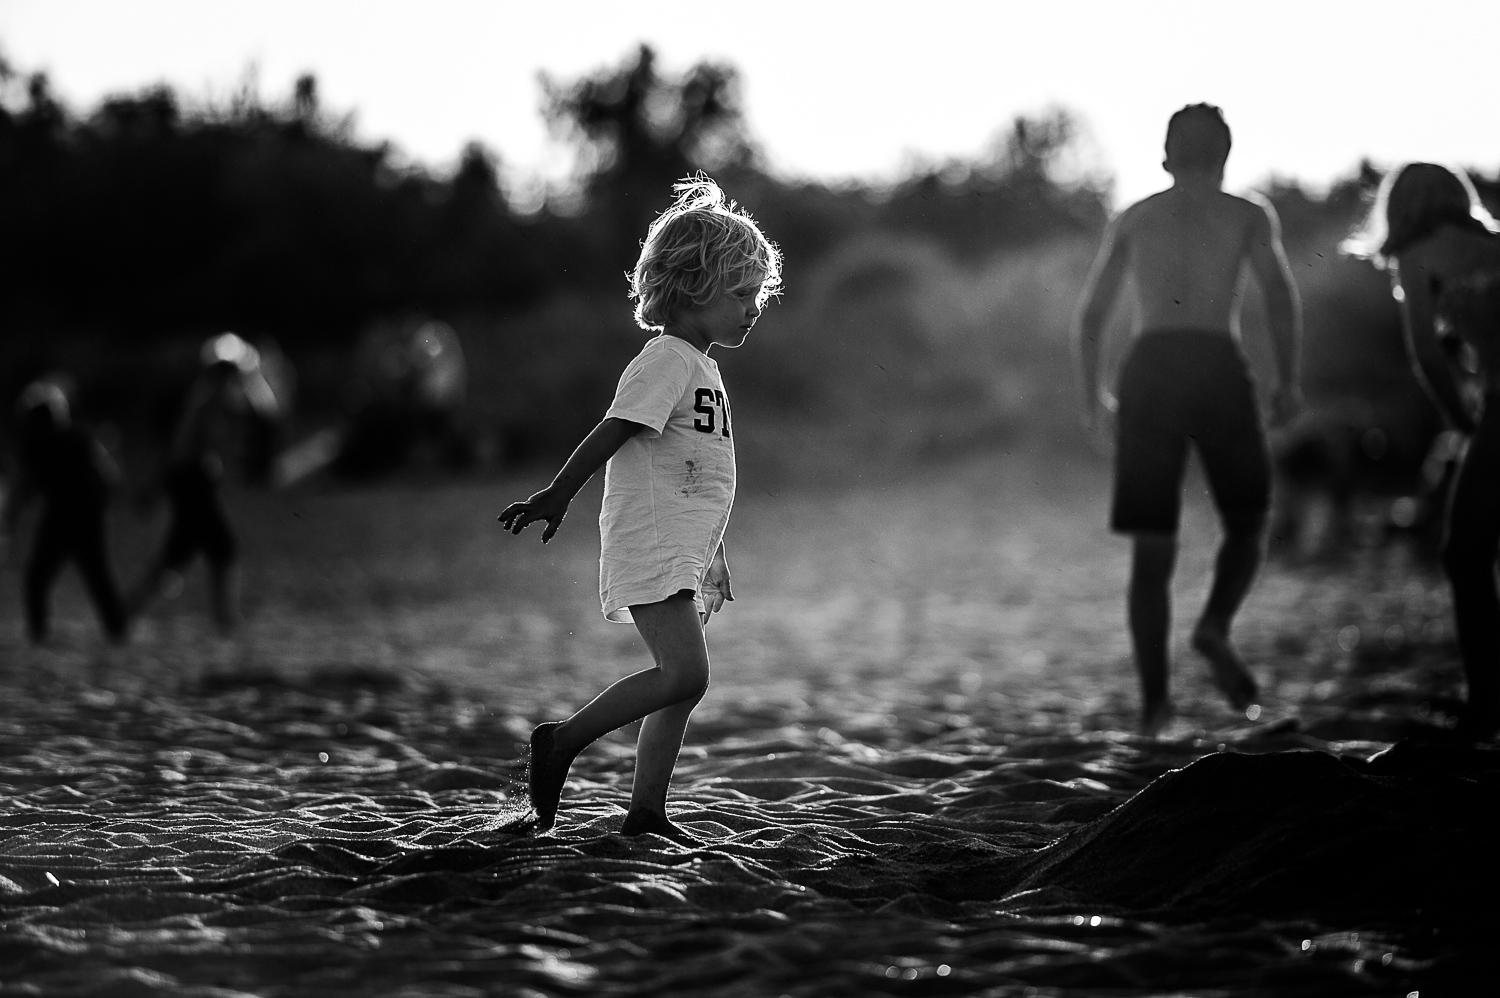 Family holidays in France - Day in the life session - family photojournalism - beach in Beziers